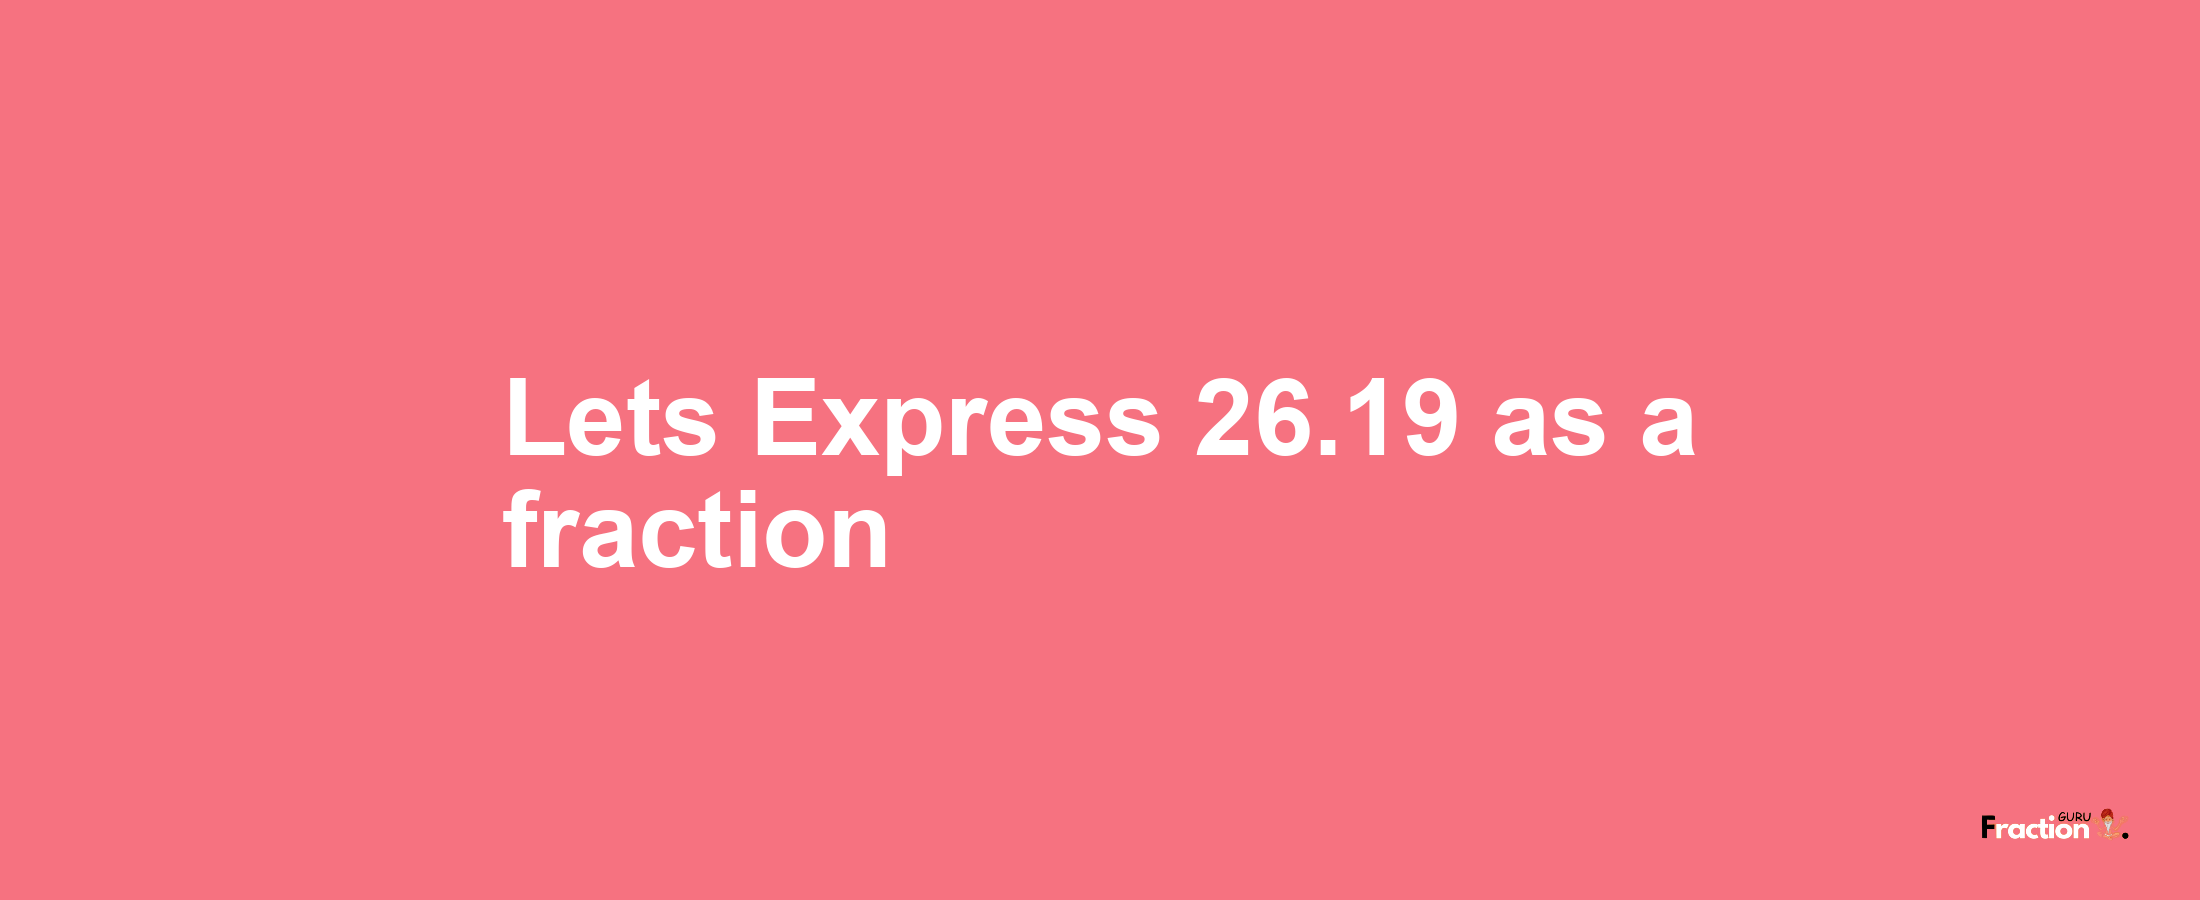 Lets Express 26.19 as afraction